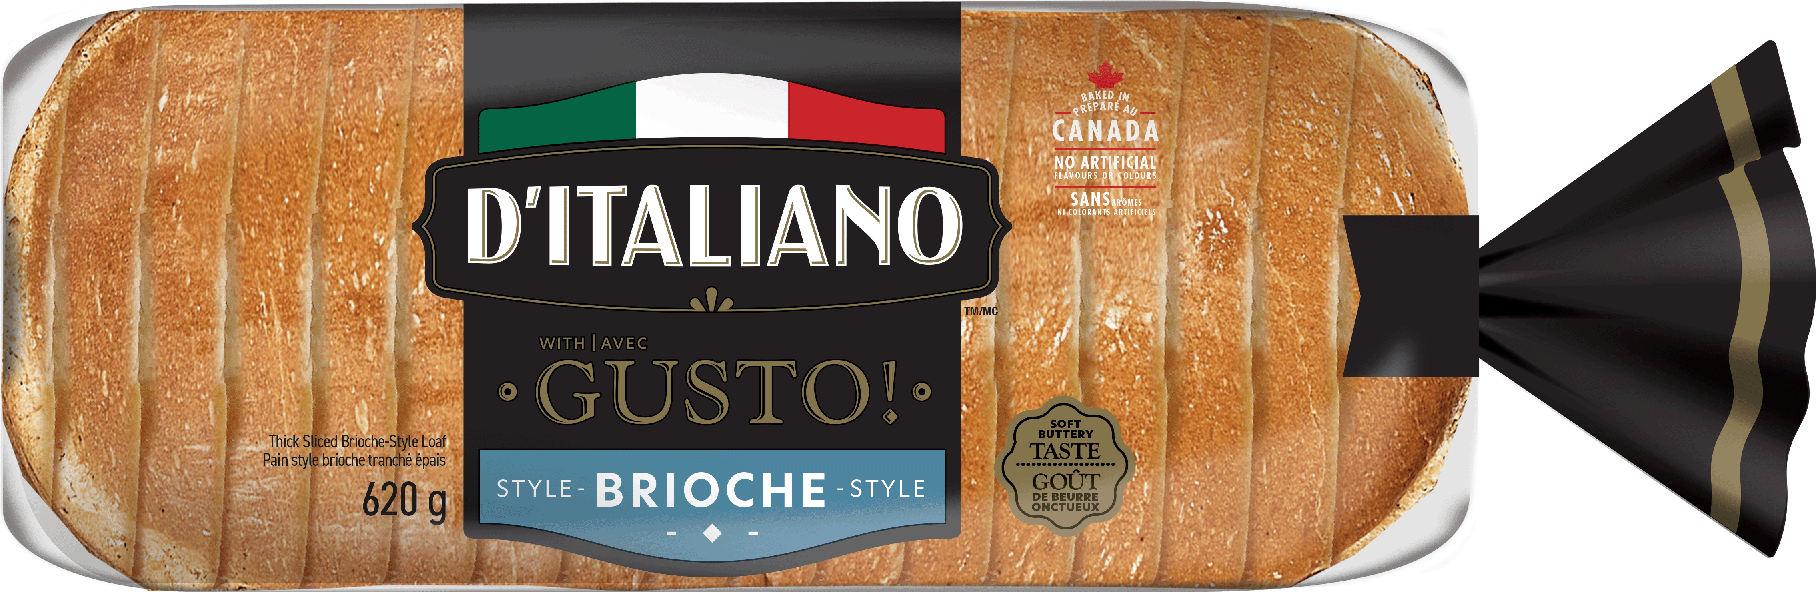 D’Italiano with Gusto!<sup>™</sup> Brioche Style Thick Sliced Loaf